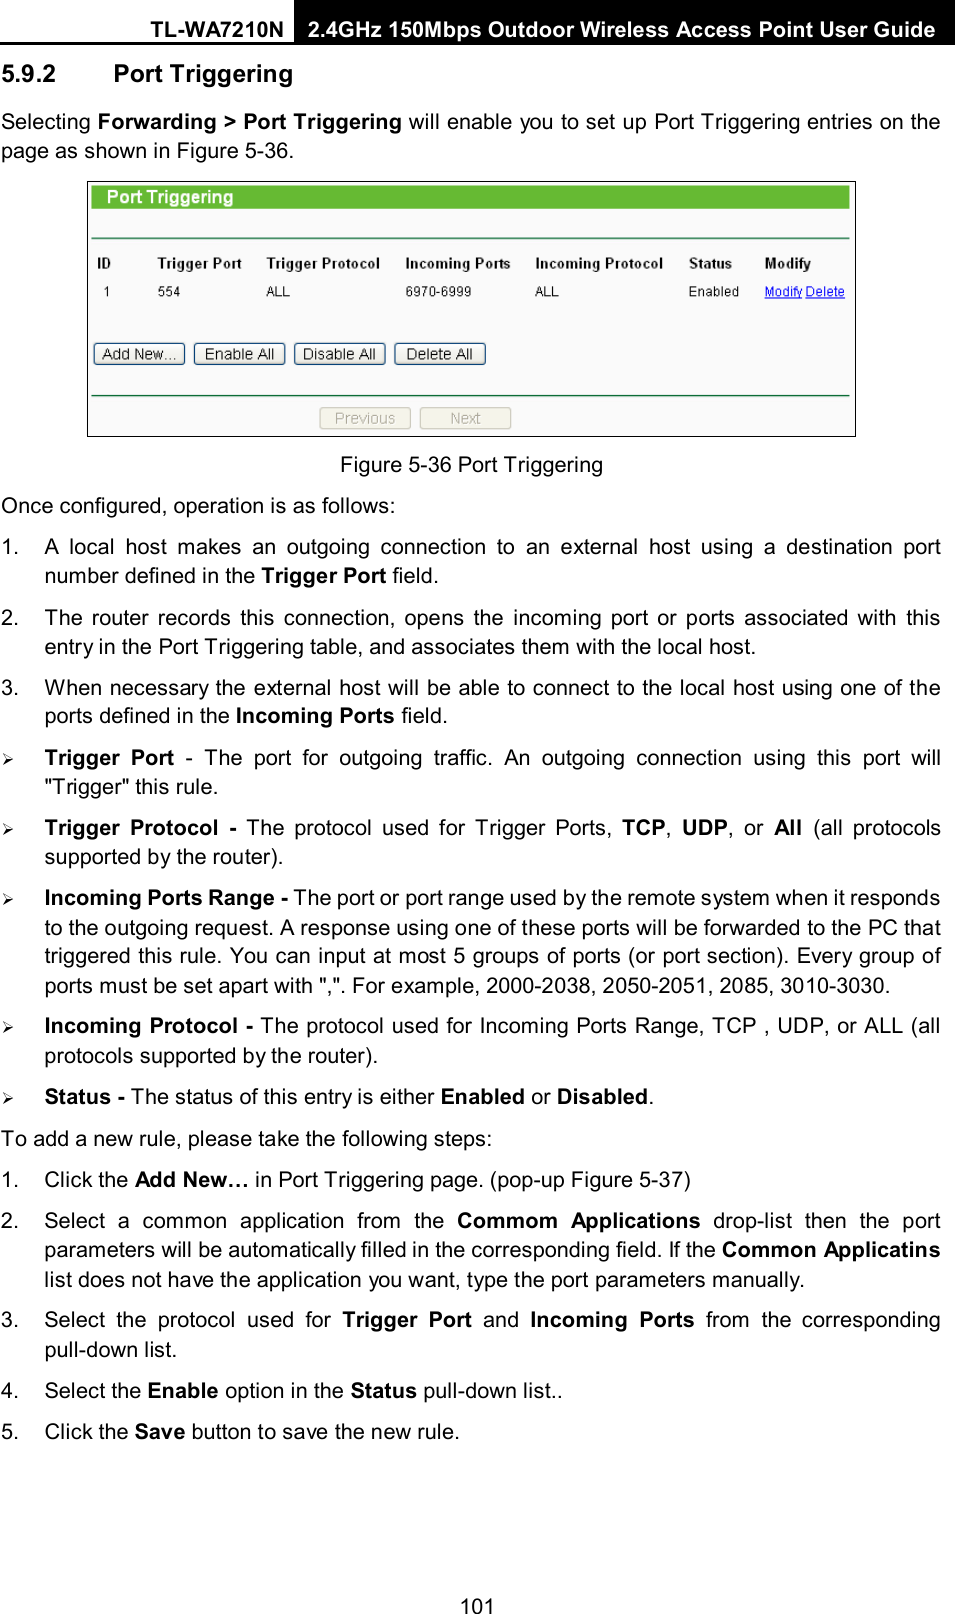 TL-WA7210N 2.4GHz 150Mbps Outdoor Wireless Access Point User Guide  1015.9.2 Port Triggering Selecting Forwarding &gt; Port Triggering will enable you to set up Port Triggering entries on the page as shown in Figure 5-36.  Figure 5-36 Port Triggering Once configured, operation is as follows:   1. A local host makes an outgoing connection to an external host using a destination port number defined in the Trigger Port field.   2. The router records this connection, opens the incoming port or ports associated with this entry in the Port Triggering table, and associates them with the local host.   3. When necessary the external host will be able to connect to the local host using one of the ports defined in the Incoming Ports field.  Trigger Port -  The port for outgoing traffic. An outgoing connection using this port will &quot;Trigger&quot; this rule.  Trigger Protocol - The protocol used for Trigger Ports, TCP,  UDP, or All  (all protocols supported by the router).  Incoming Ports Range - The port or port range used by the remote system when it responds to the outgoing request. A response using one of these ports will be forwarded to the PC that triggered this rule. You can input at most 5 groups of ports (or port section). Every group of ports must be set apart with &quot;,&quot;. For example, 2000-2038, 2050-2051, 2085, 3010-3030.  Incoming Protocol - The protocol used for Incoming Ports Range, TCP , UDP, or ALL (all protocols supported by the router).  Status - The status of this entry is either Enabled or Disabled. To add a new rule, please take the following steps:   1. Click the Add New… in Port Triggering page. (pop-up Figure 5-37) 2. Select a common application from the Commom Applications drop-list then the port parameters will be automatically filled in the corresponding field. If the Common Applicatins list does not have the application you want, type the port parameters manually. 3. Select the protocol used for Trigger Port and Incoming Ports from the corresponding pull-down list. 4. Select the Enable option in the Status pull-down list..   5. Click the Save button to save the new rule. 